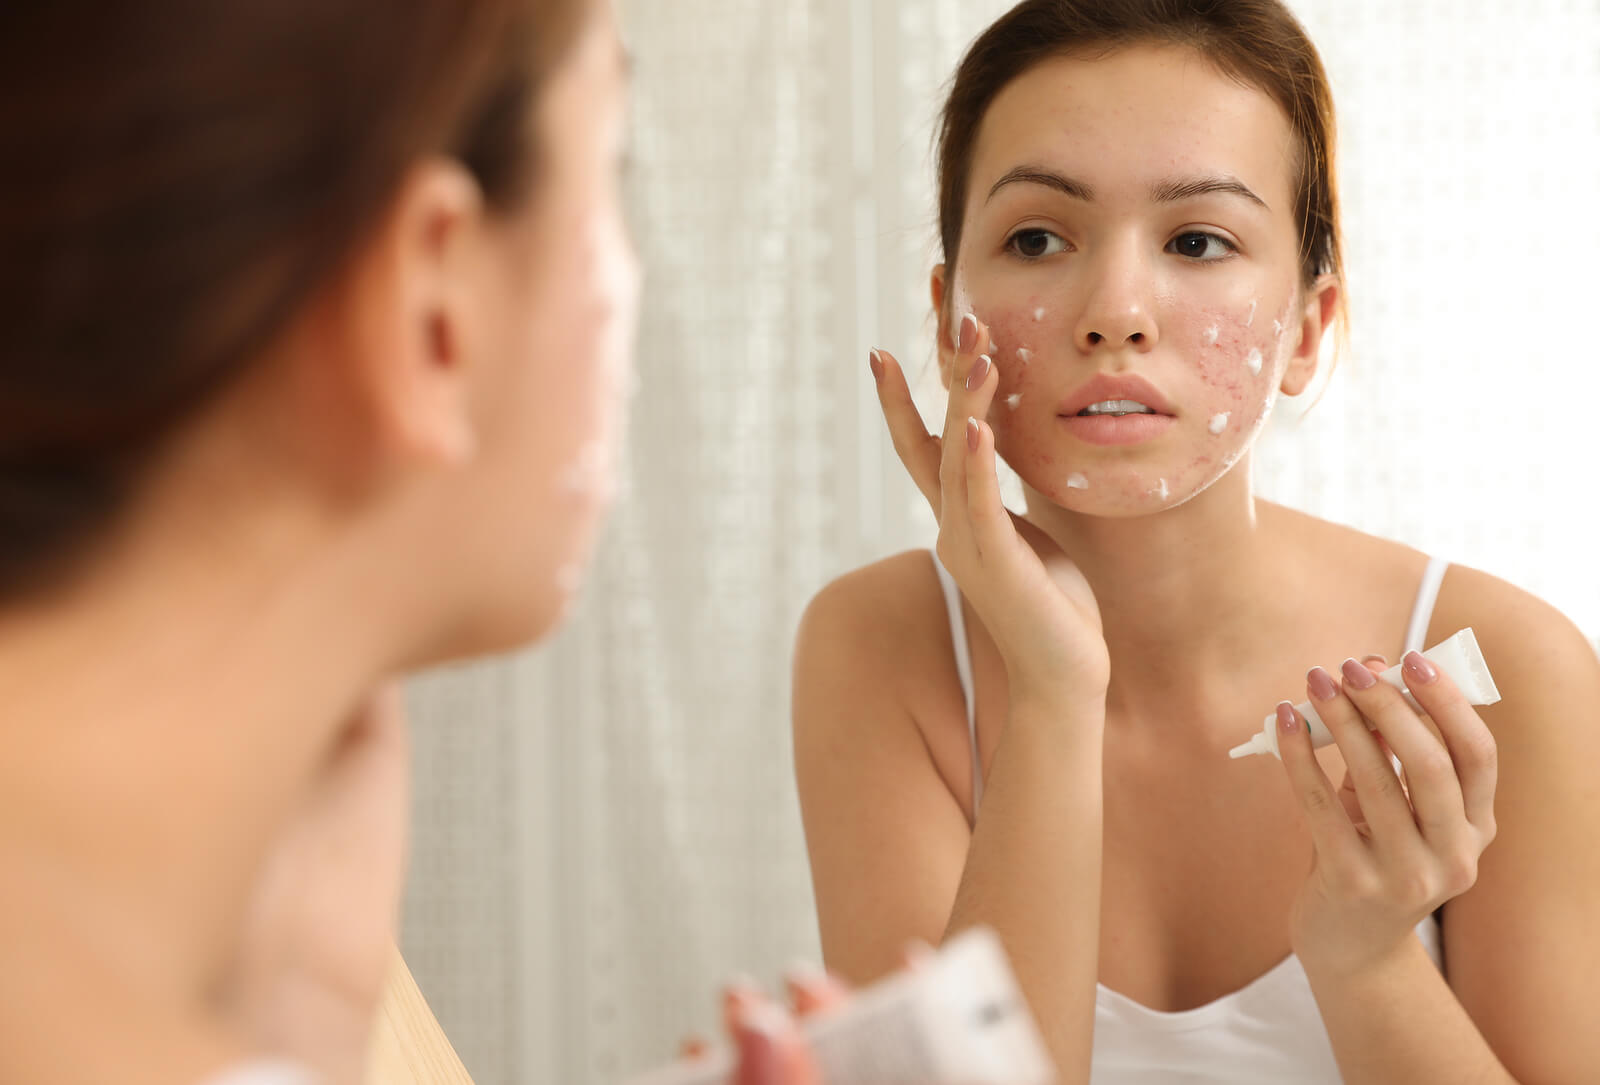 Premenstrual acne can be treated with creams